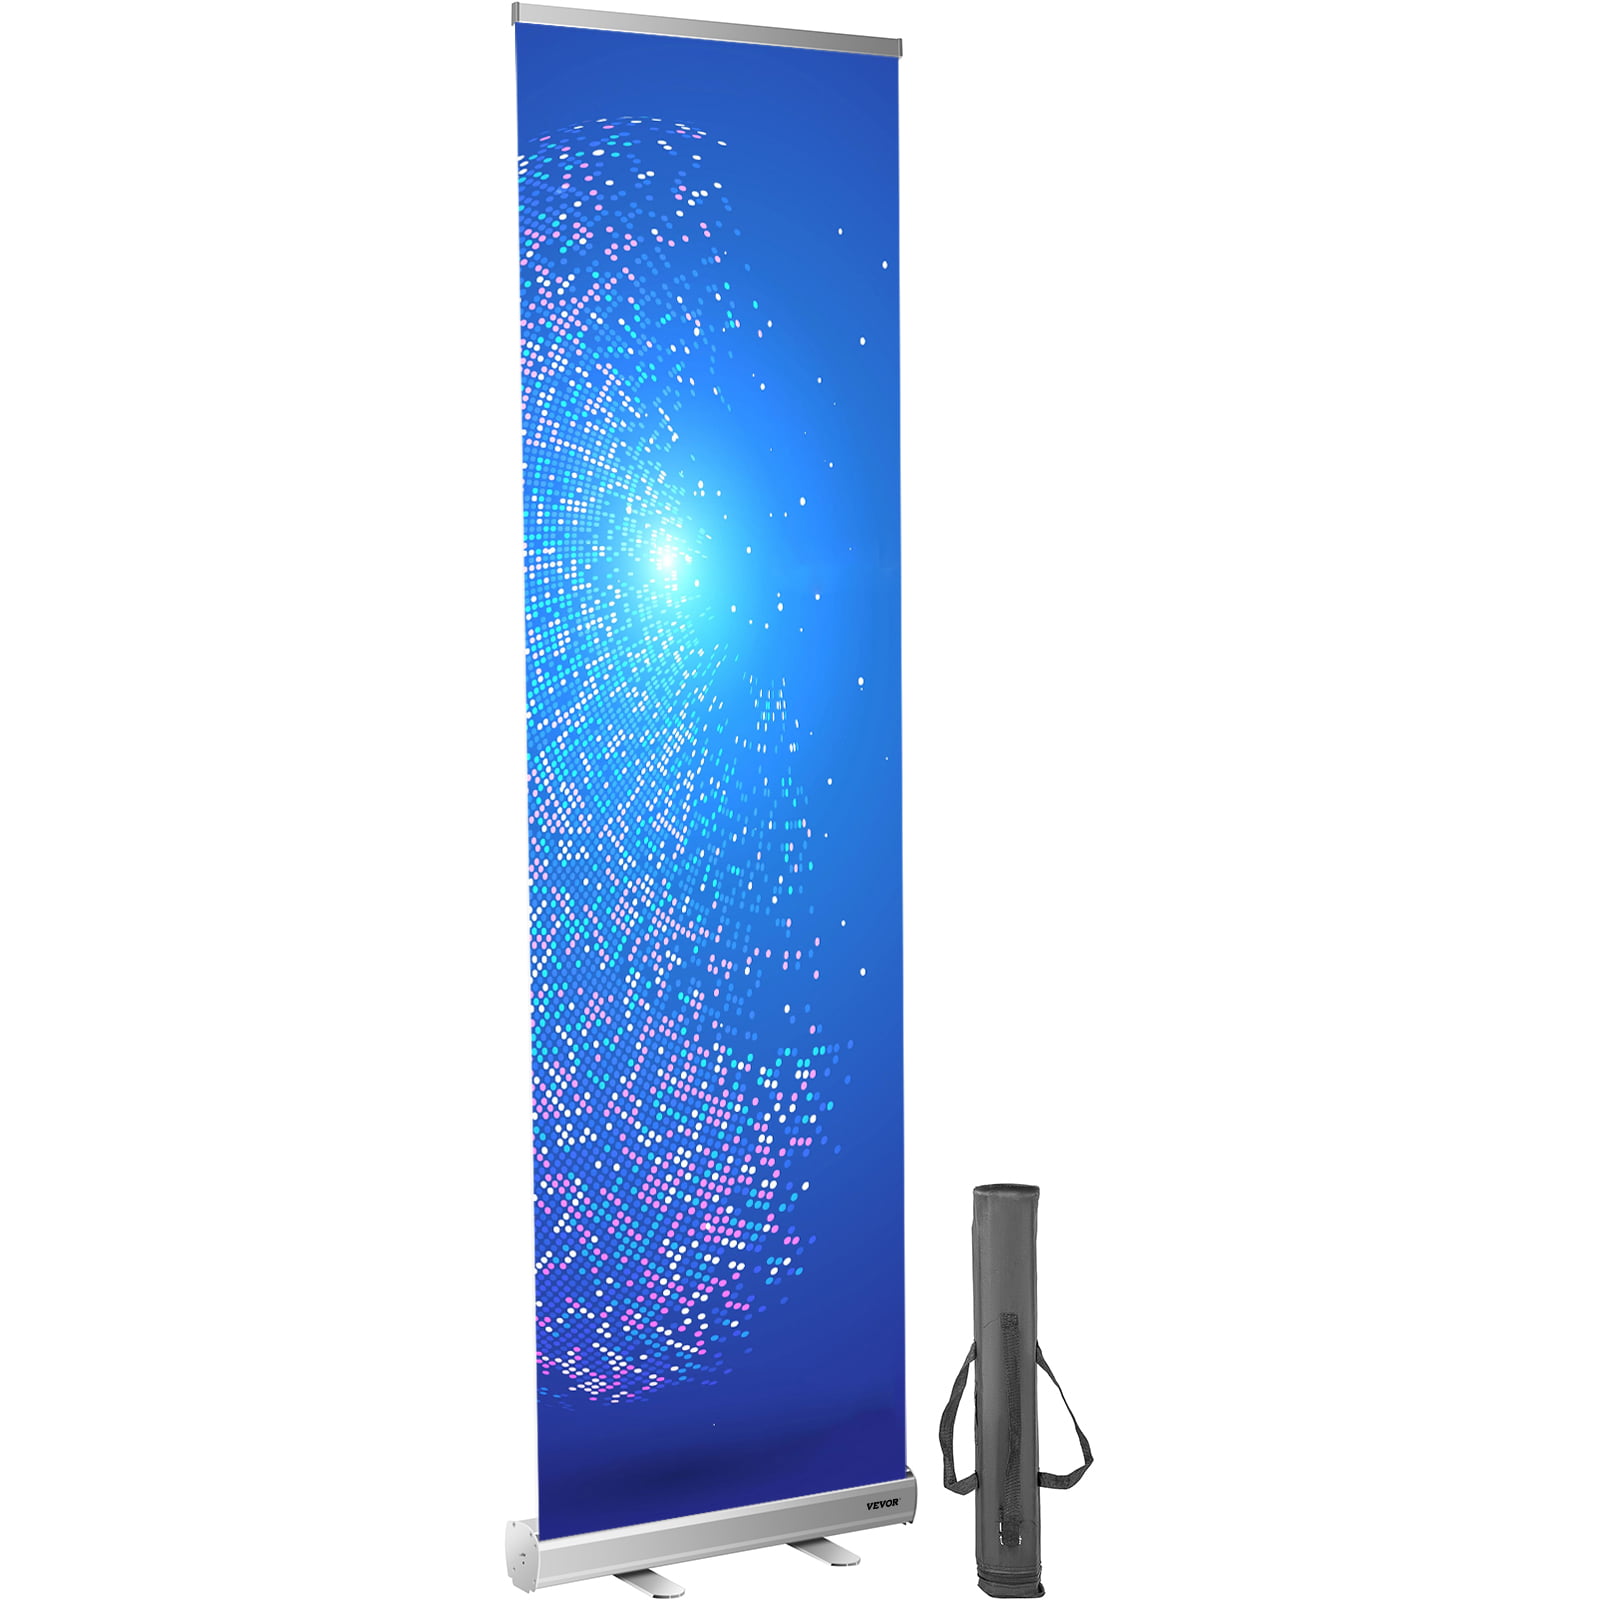 DLWDMRV Waterproof Roll Up Hotel Roll up Banner Portable Pull-Out Roll up Banner Transparent,Hygiene Partition Screen,Sneeze Guard Screen,Spit Protection,for Restaurants/Offices,with Storage Bag,Alumi